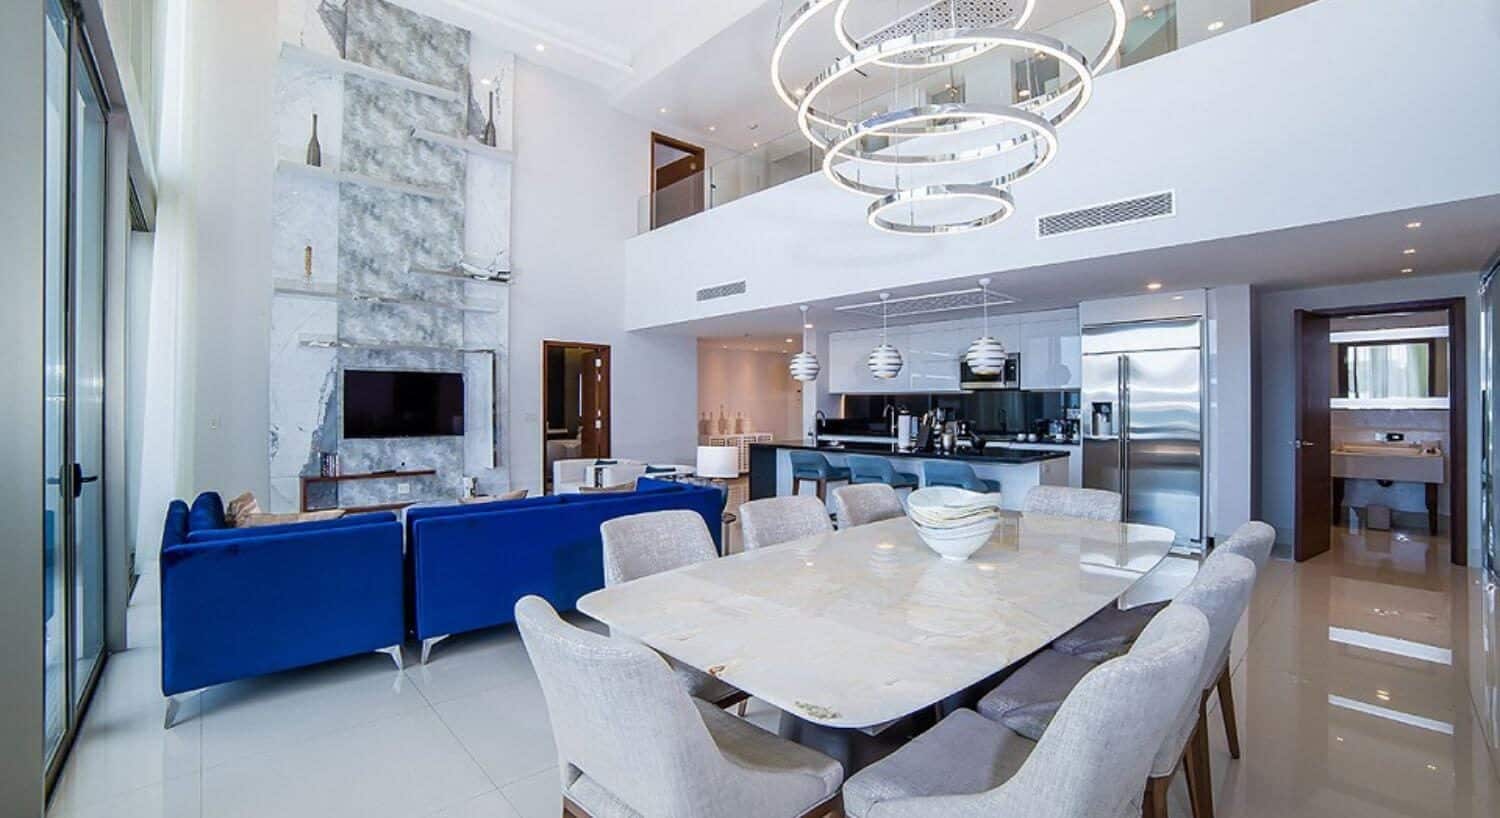 A large multi story open floor plan living room with blue sofas and white armchairs, a dining area with table and 8 chairs, a gourmet kitchen, a door open to a bathroom, and a second story with open doors to various rooms.